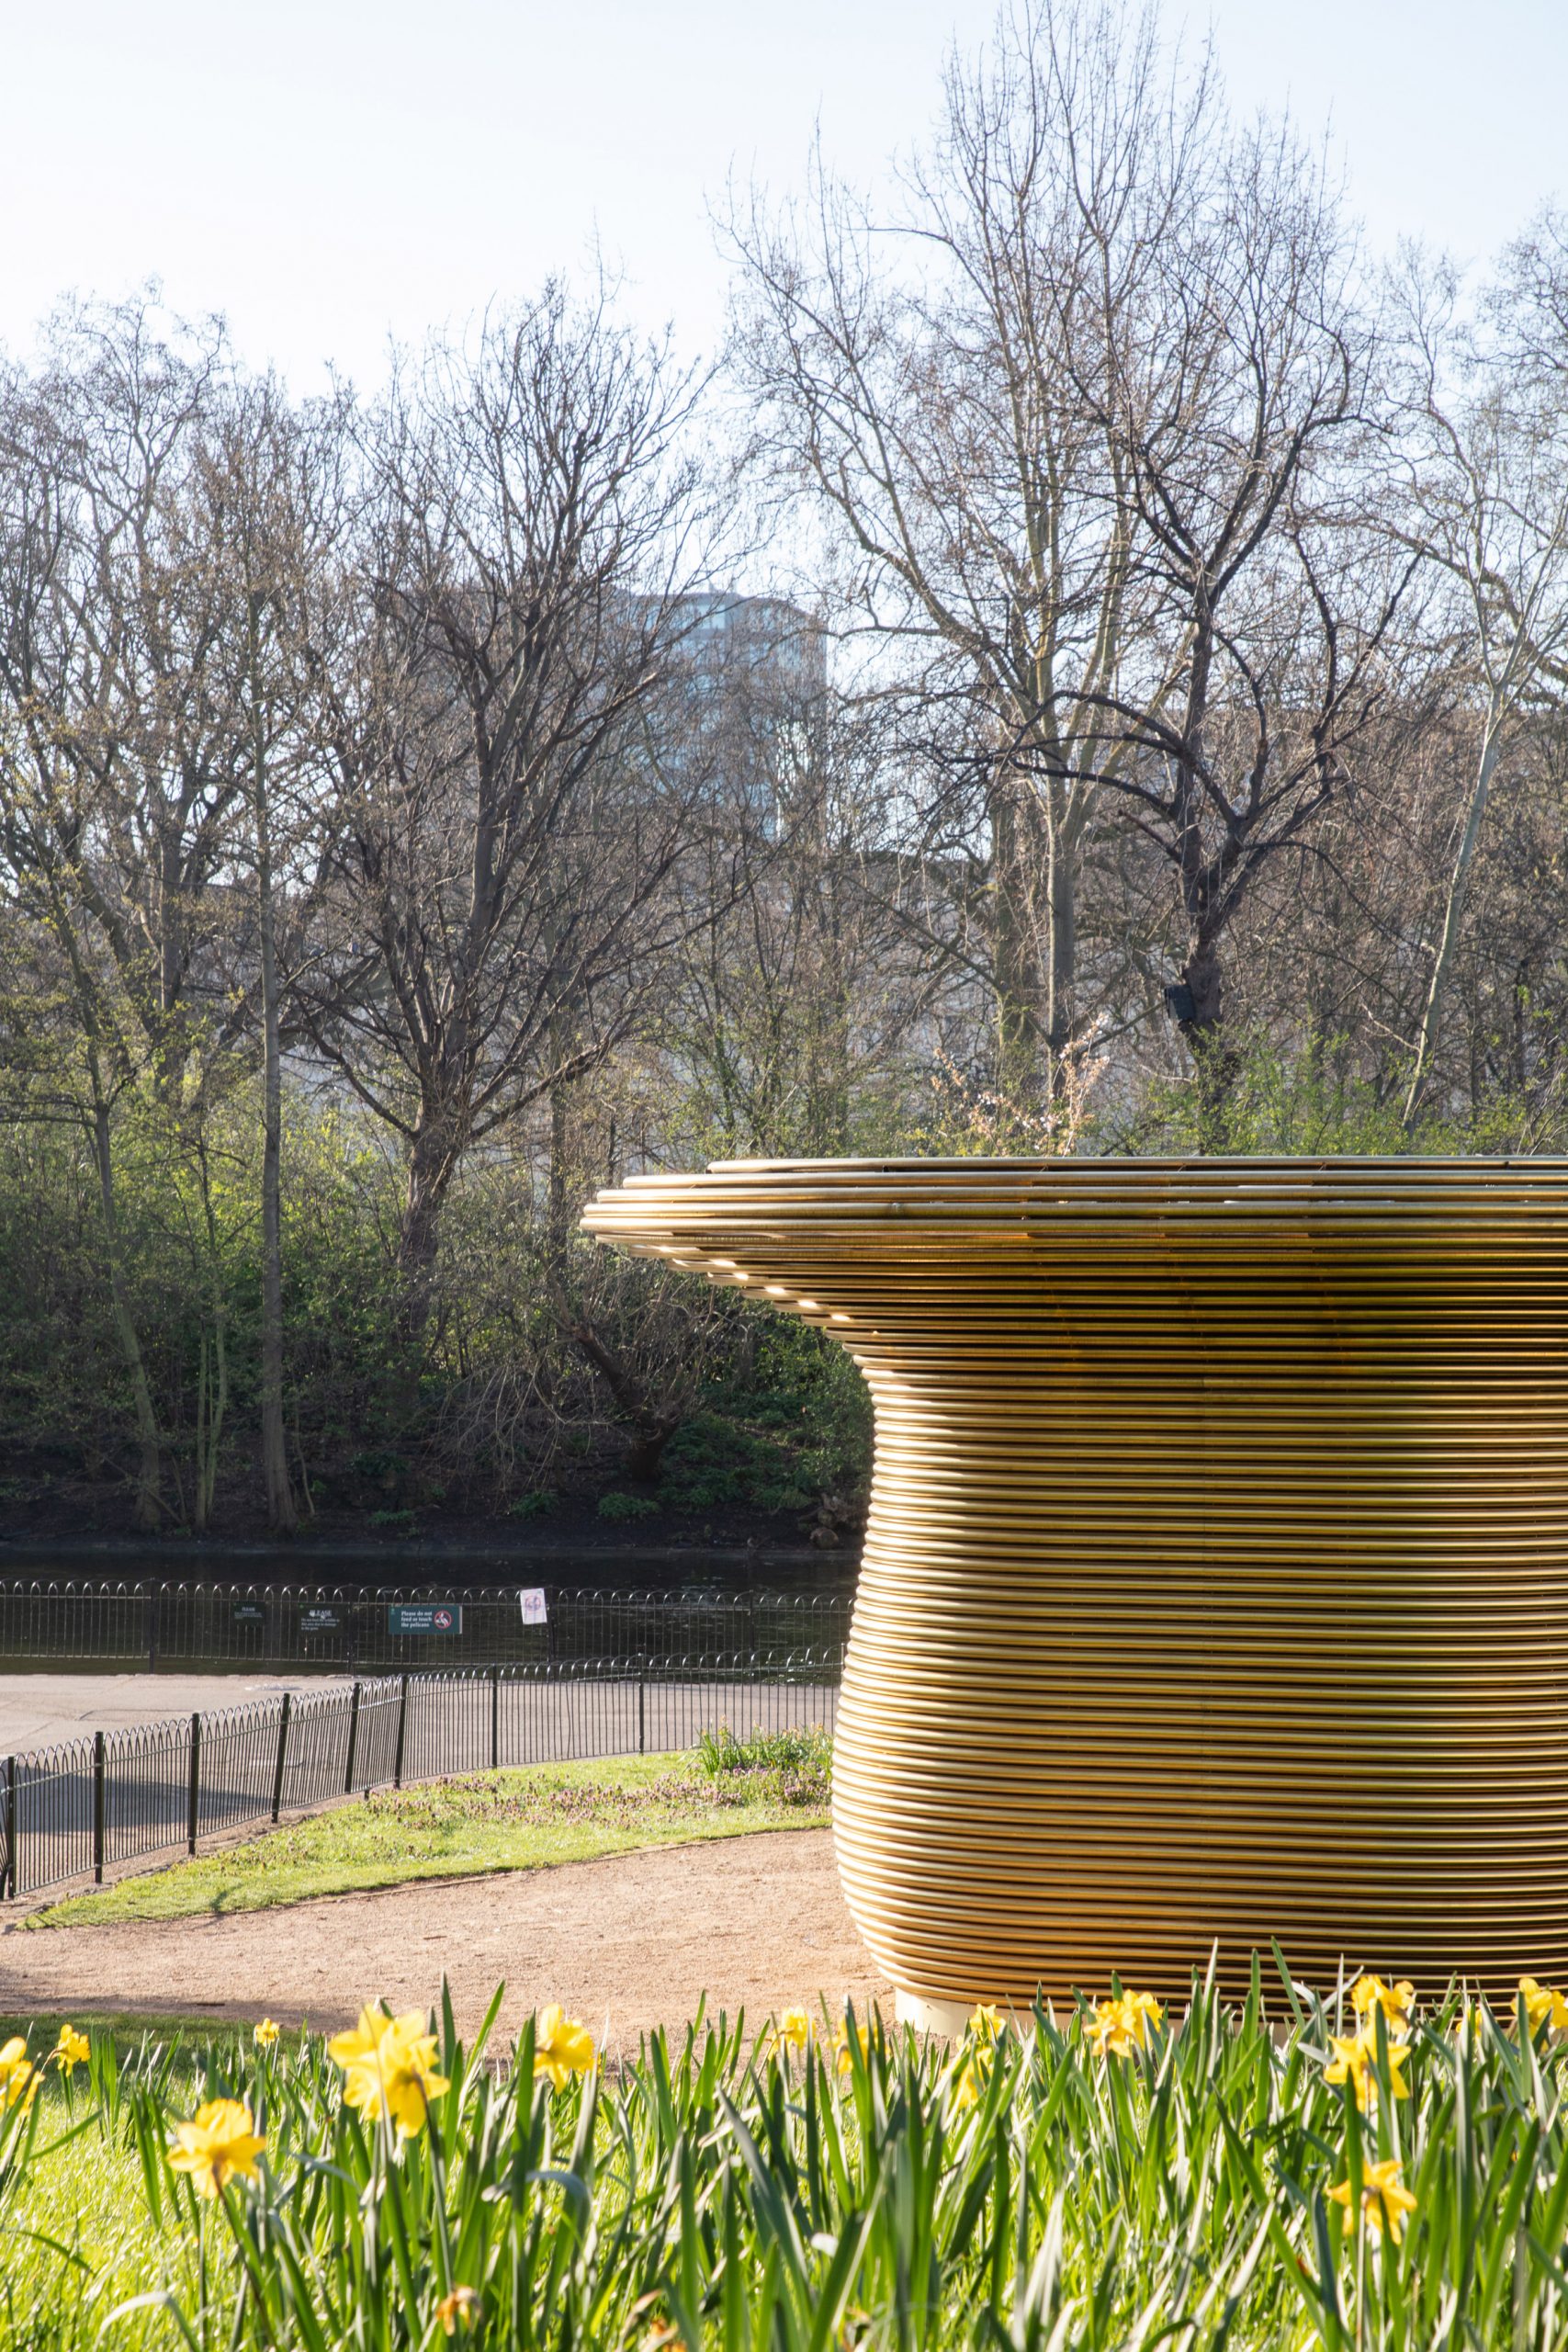 Golden drinks stand in St James's Park